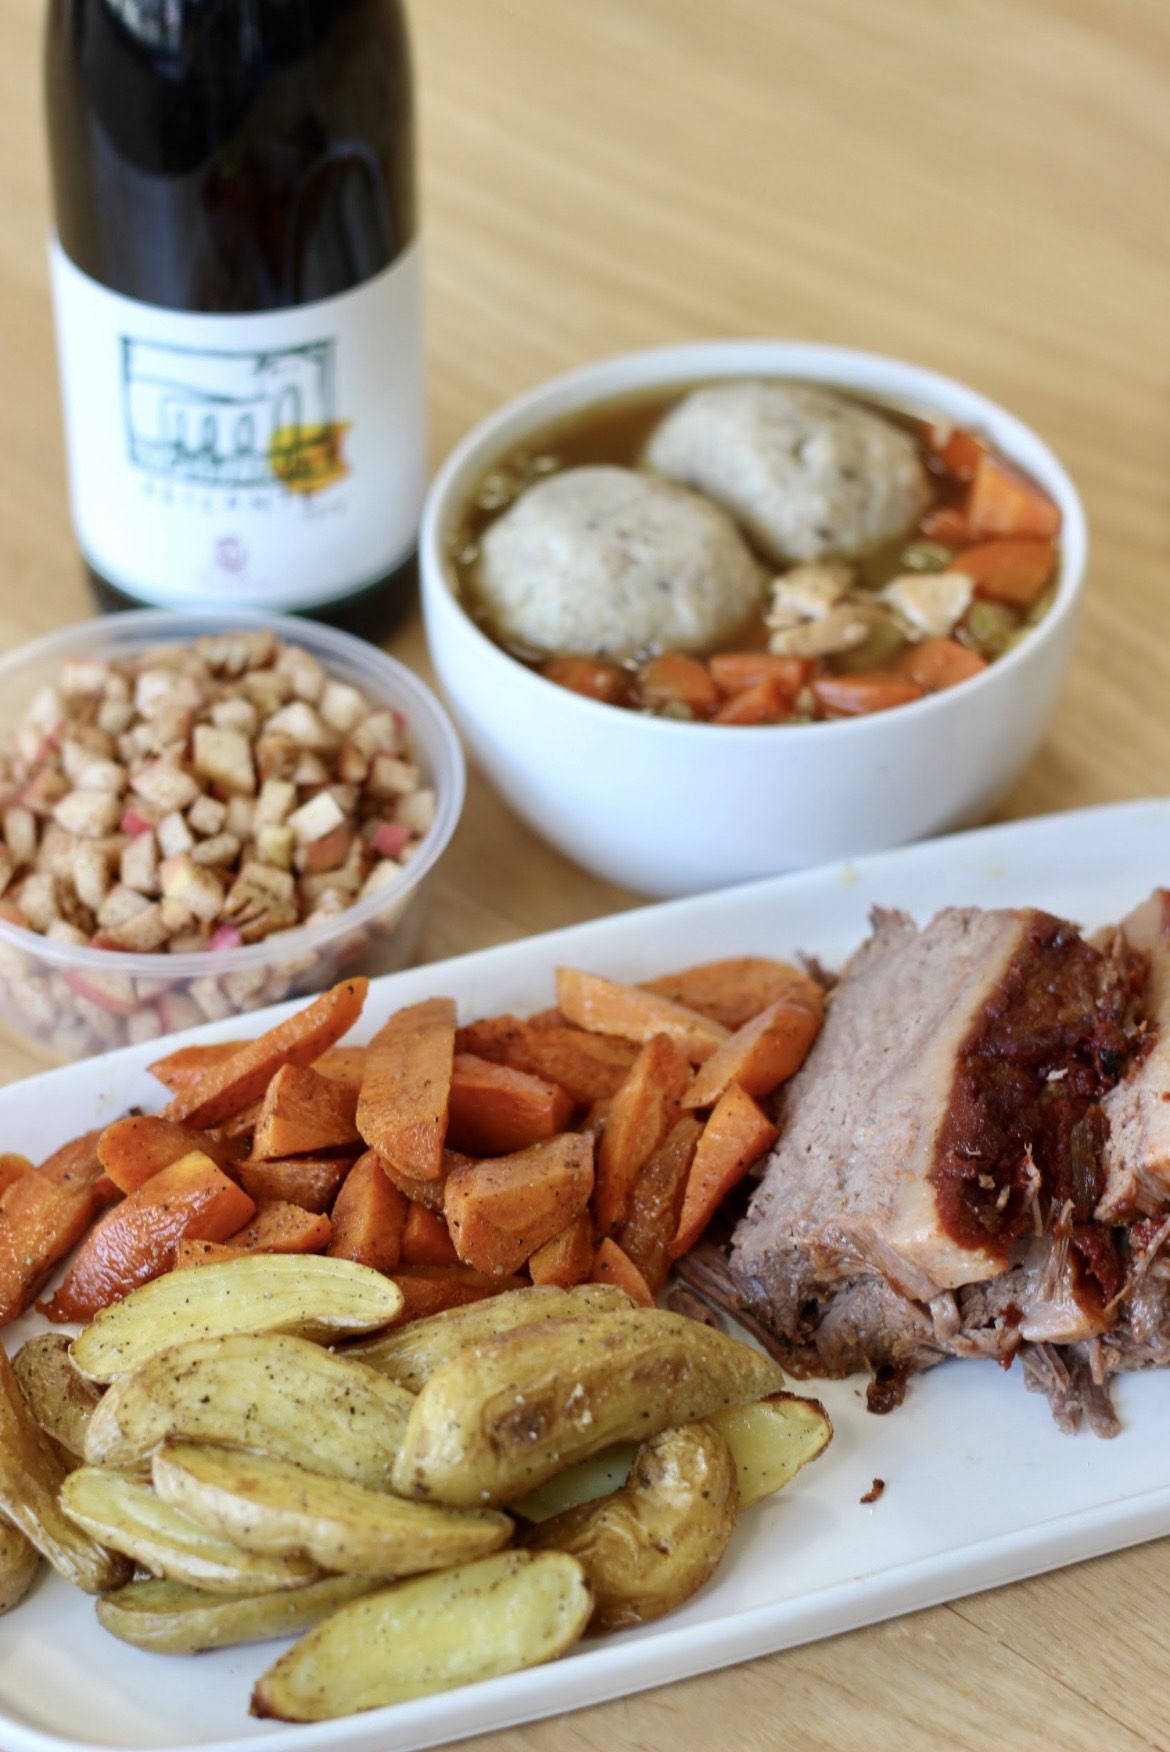 A white rectangular plate loaded with sliced brisket and roasted carrots and potatoes with a white ceramic bowl full of matzo ball soup behind it along with a takeout container full of chariest and a bottle of wine.